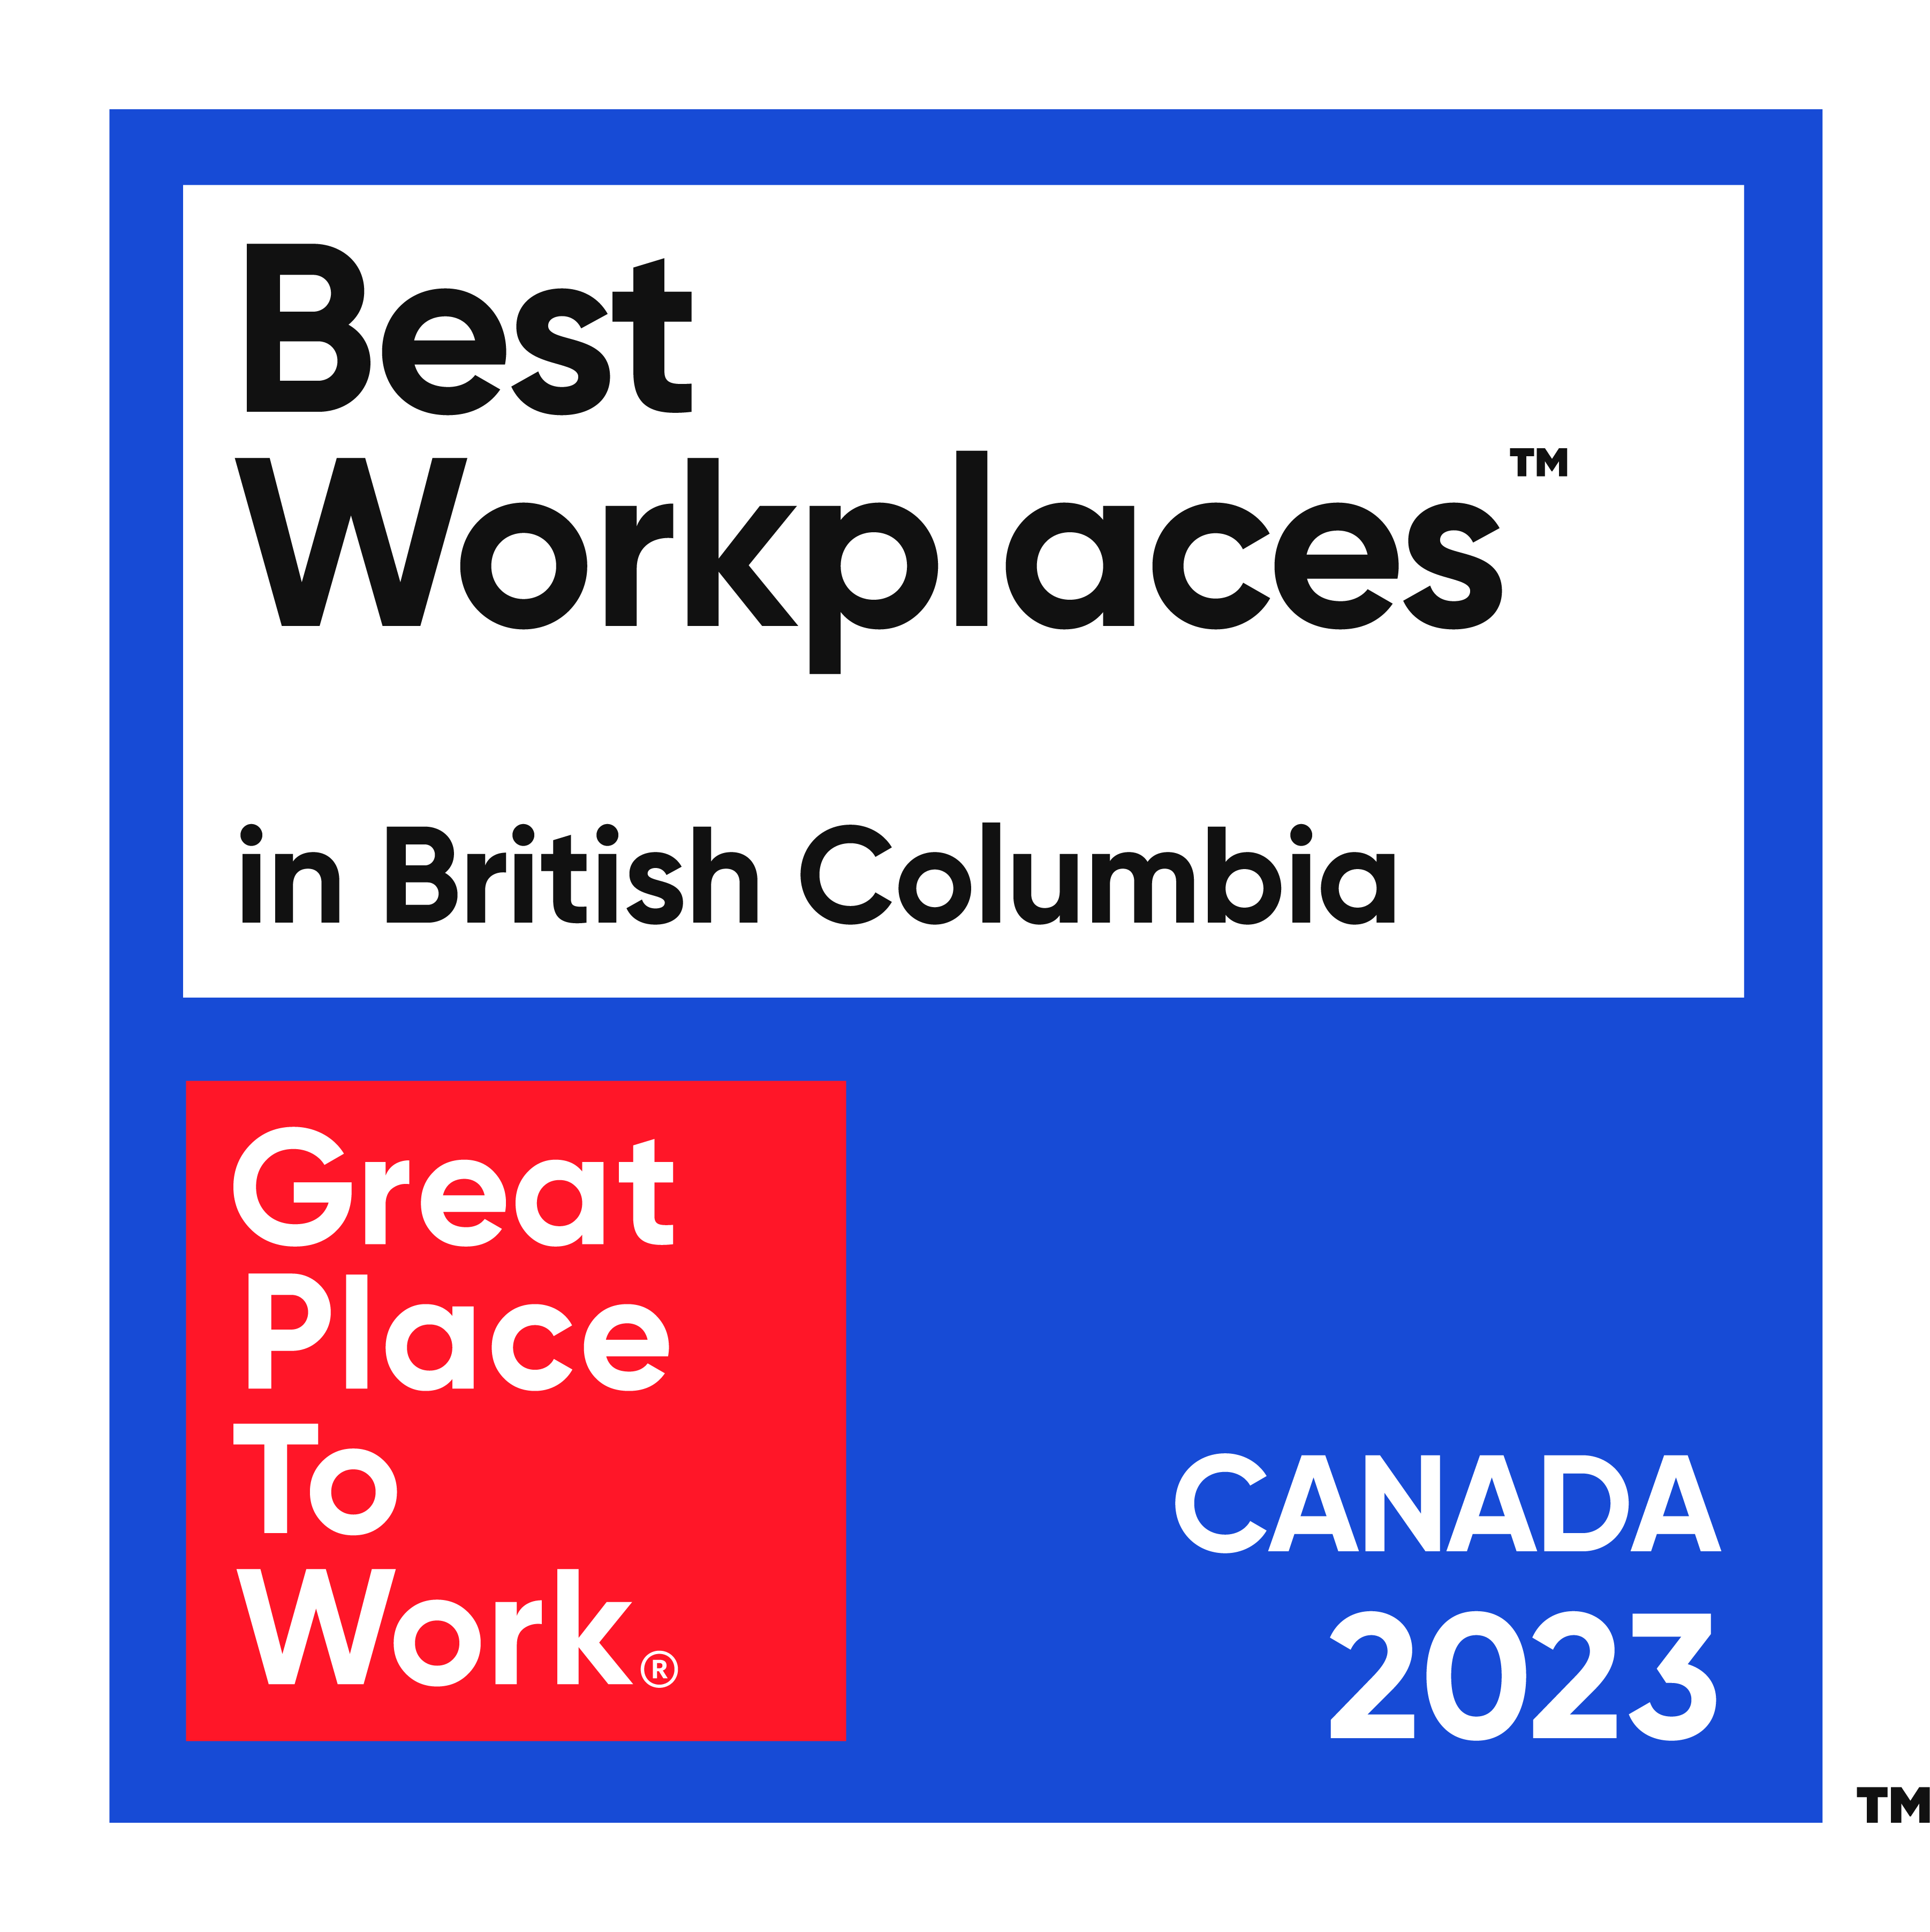 Best Workplaces  in British Columbia, Great Places to Work, Canada 2022